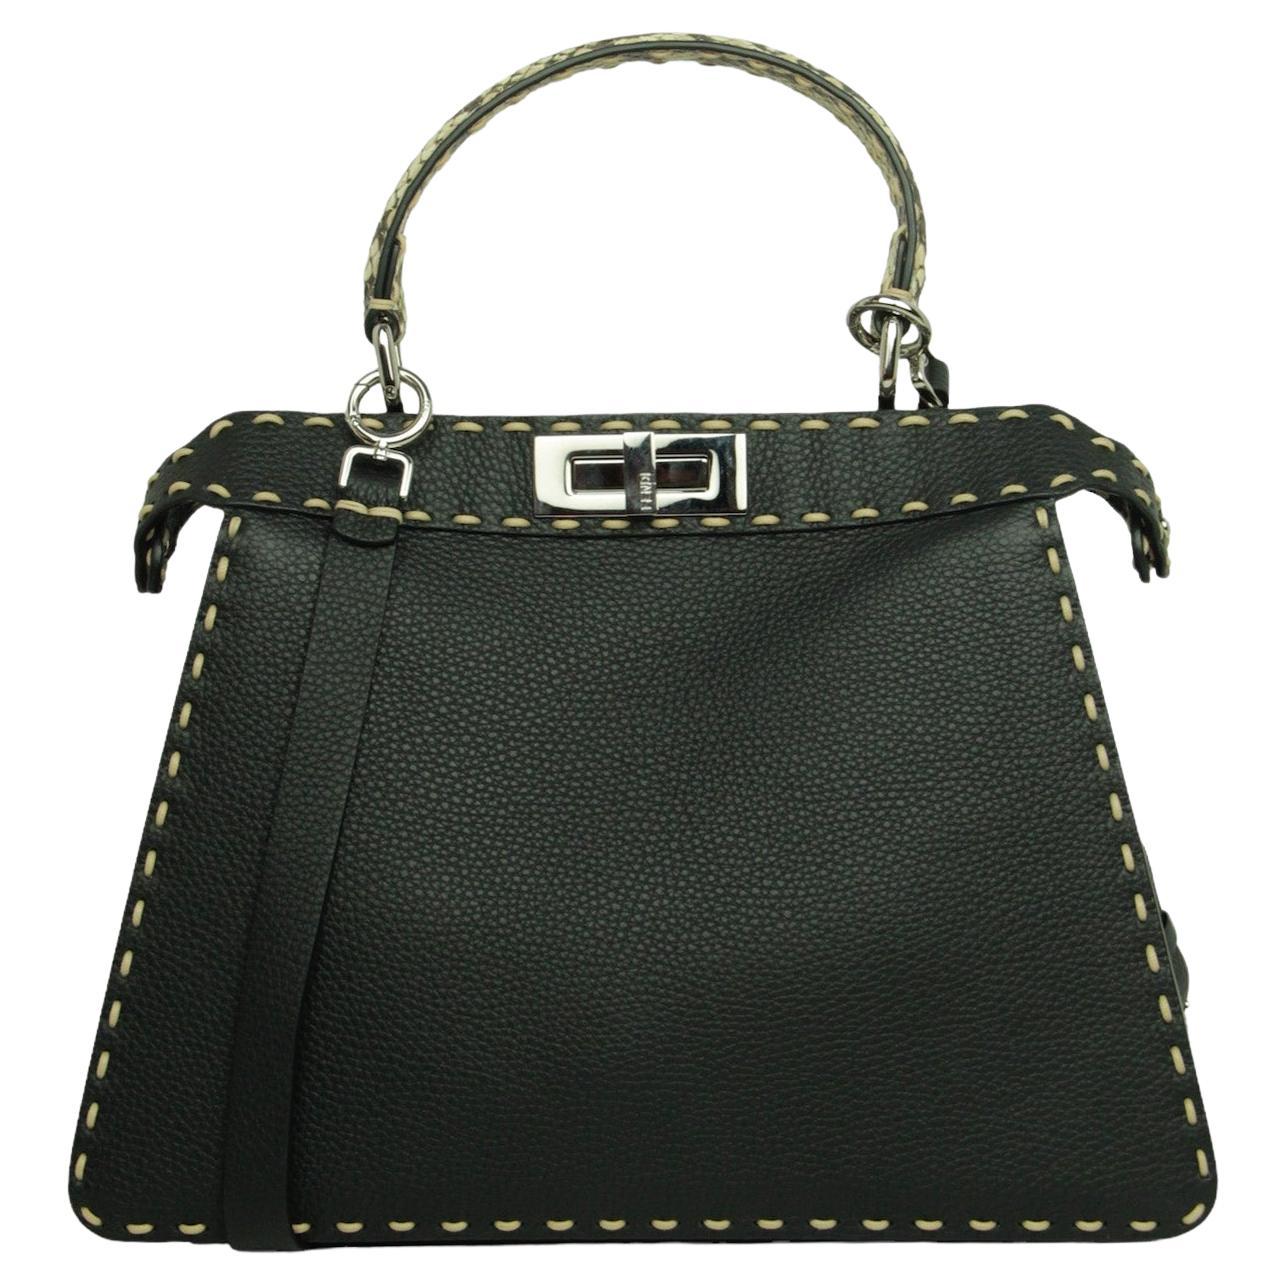 Are Fendi bag bugs made with metal?